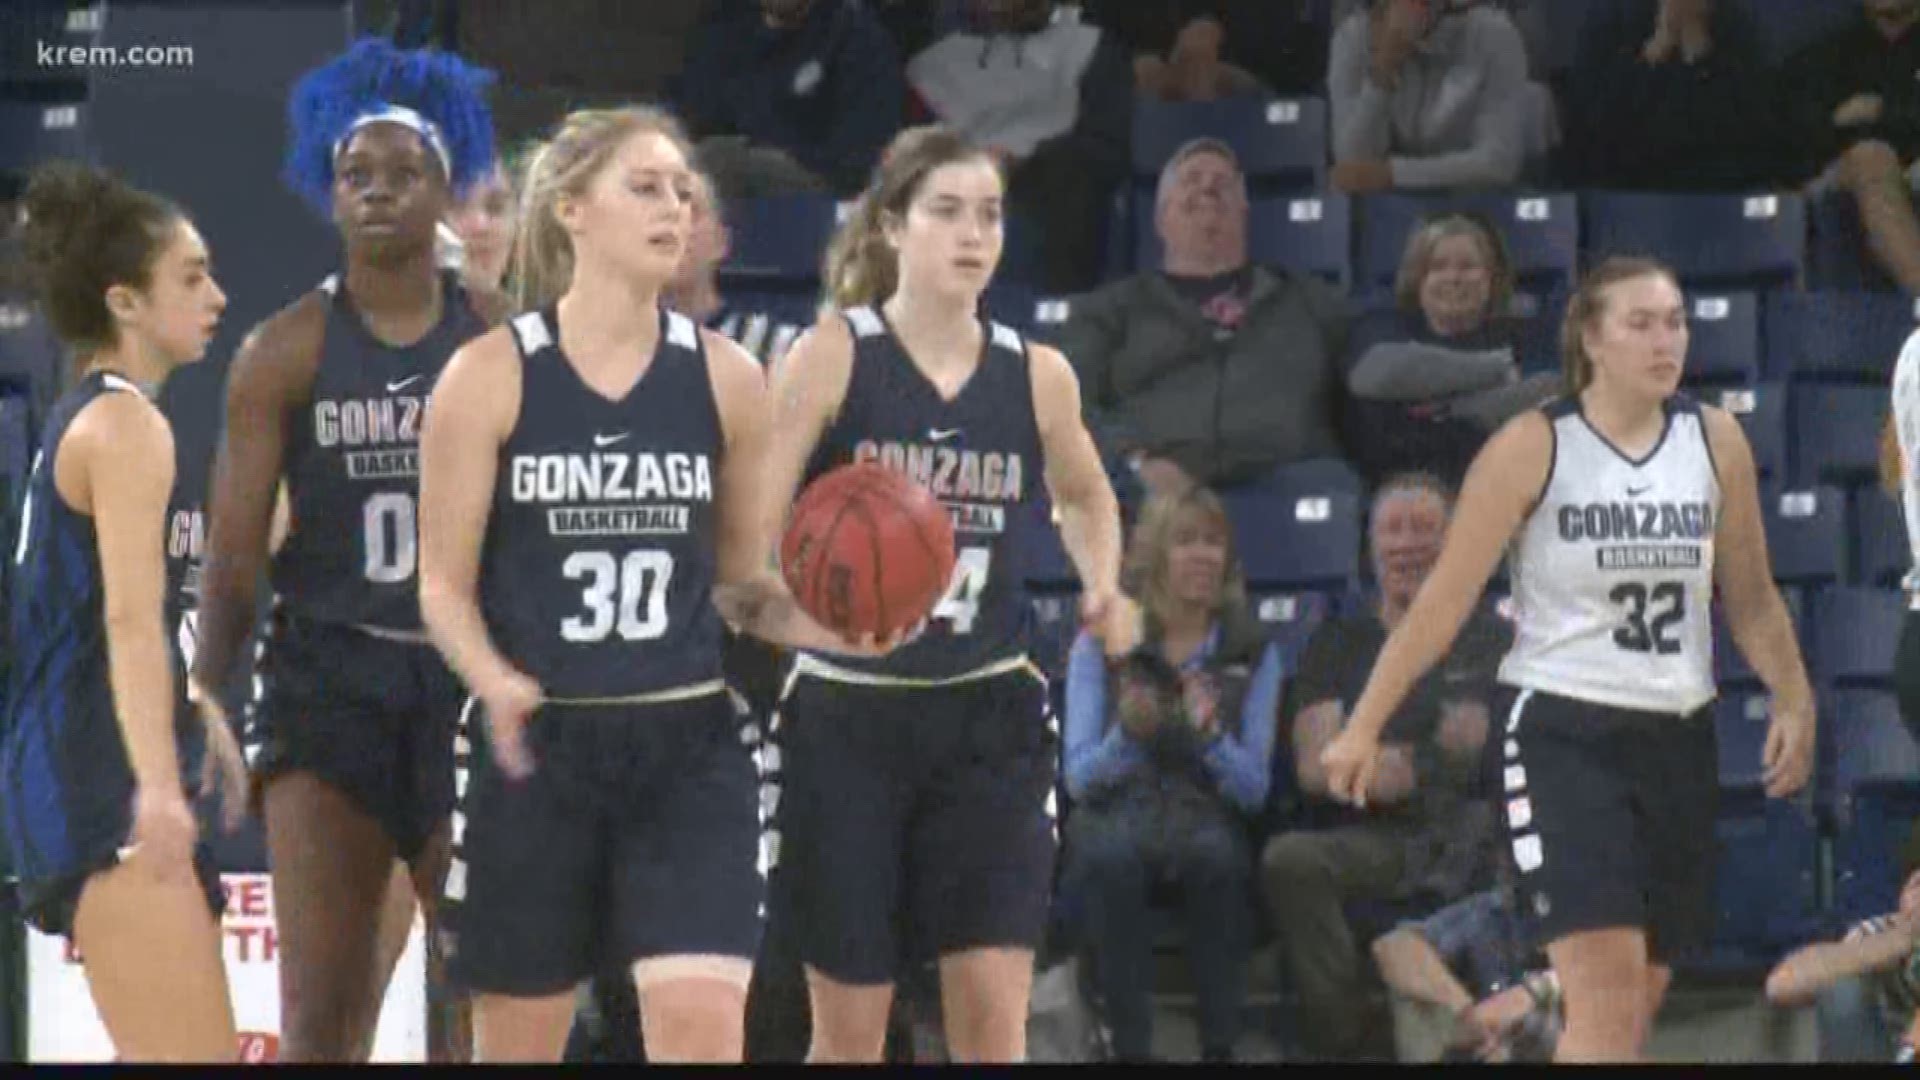 he Gonzaga women?s basketball team introduced new players and let fans get reacquainted with some familiar ones while putting on a great performance at the annual Numerica Fan Fest inside the McCarthey Athletic Center Saturday afternoon.